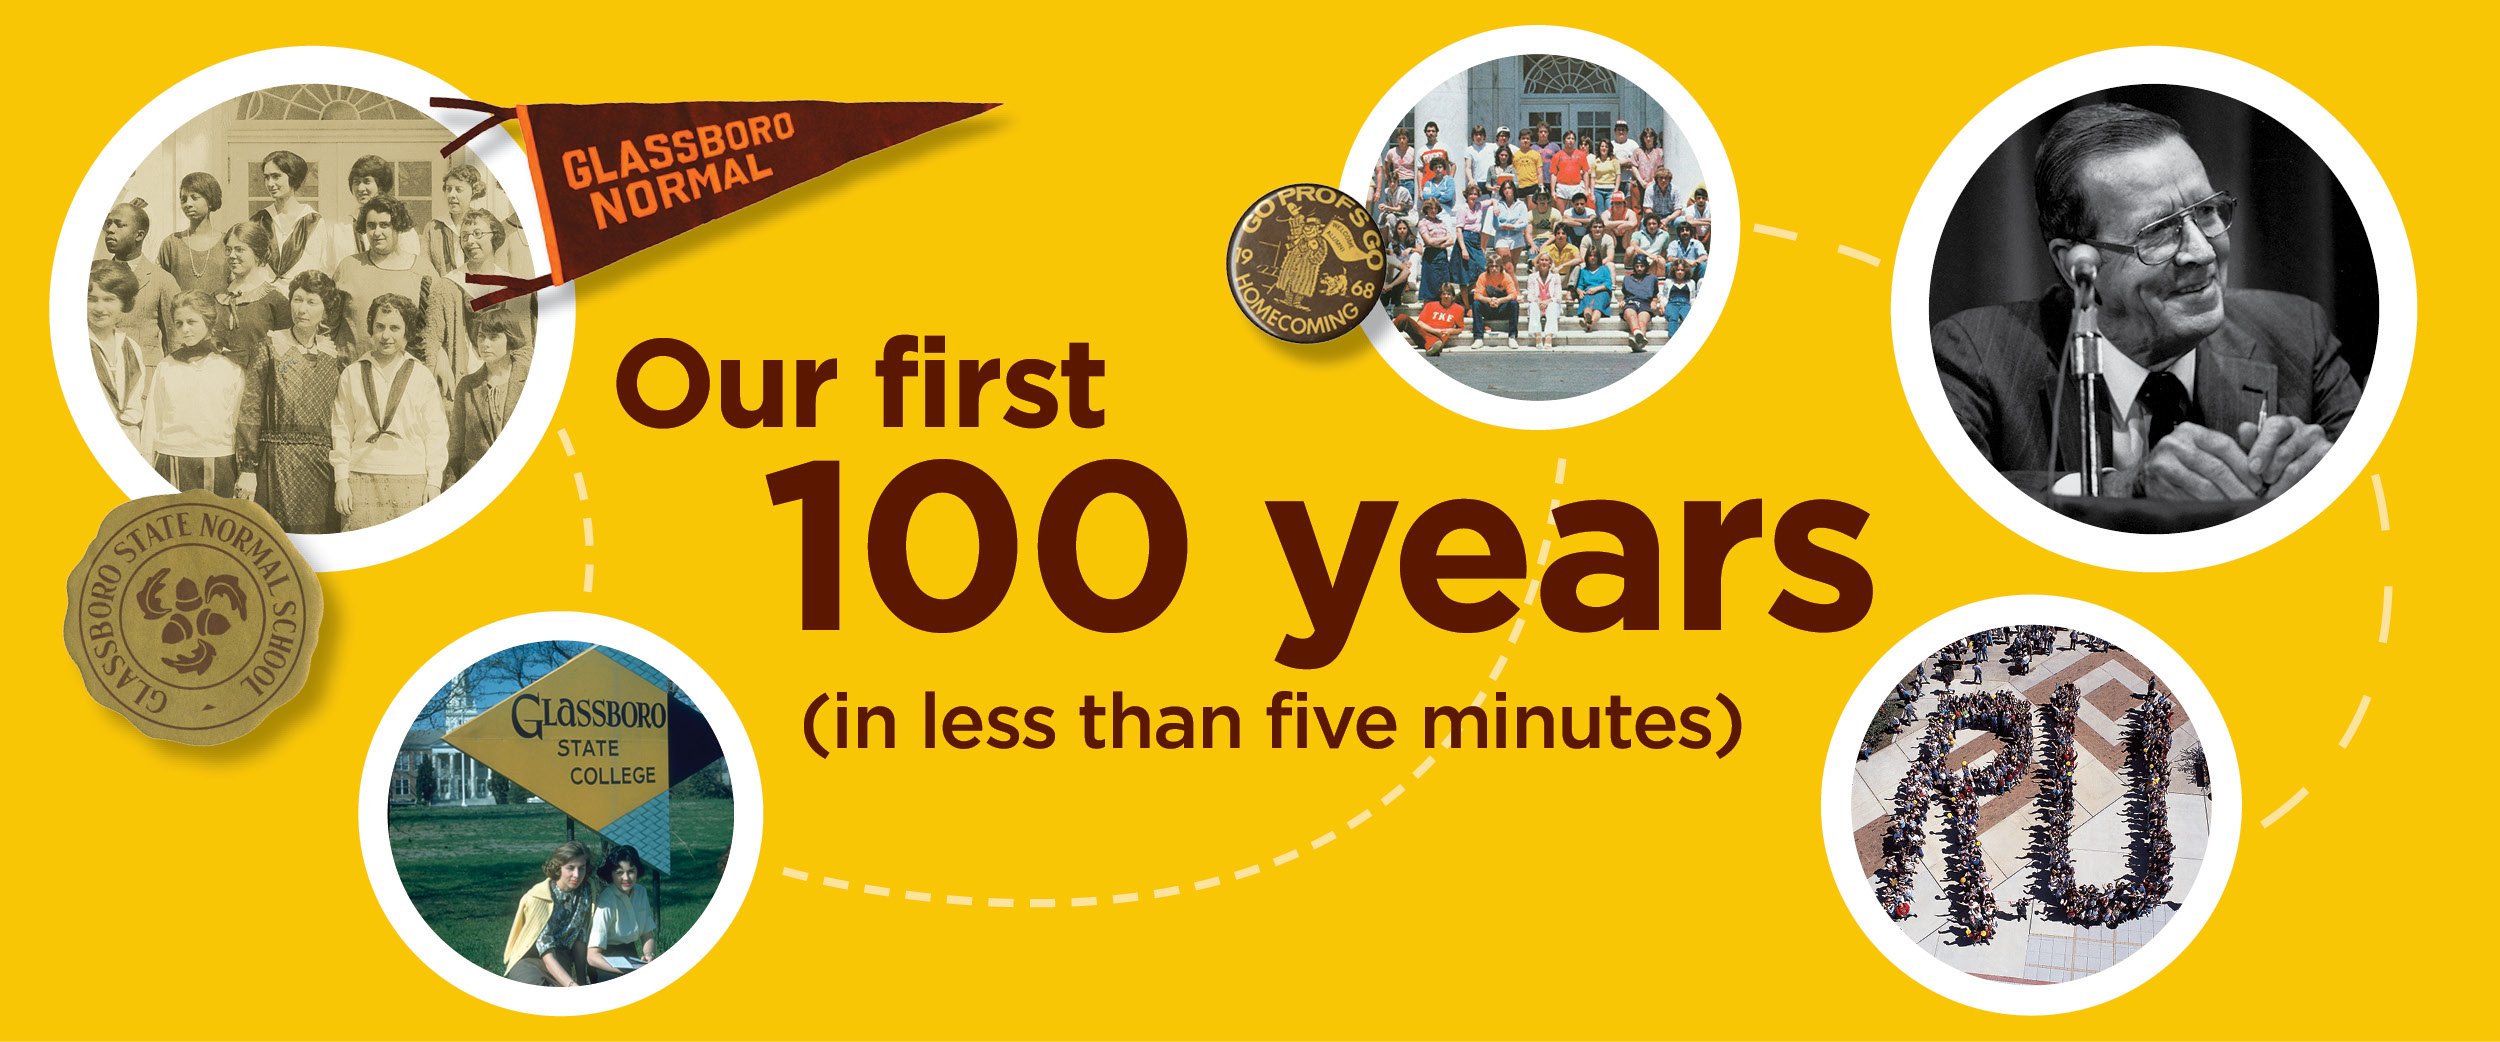 Our first 100 years (in less than five minutes)